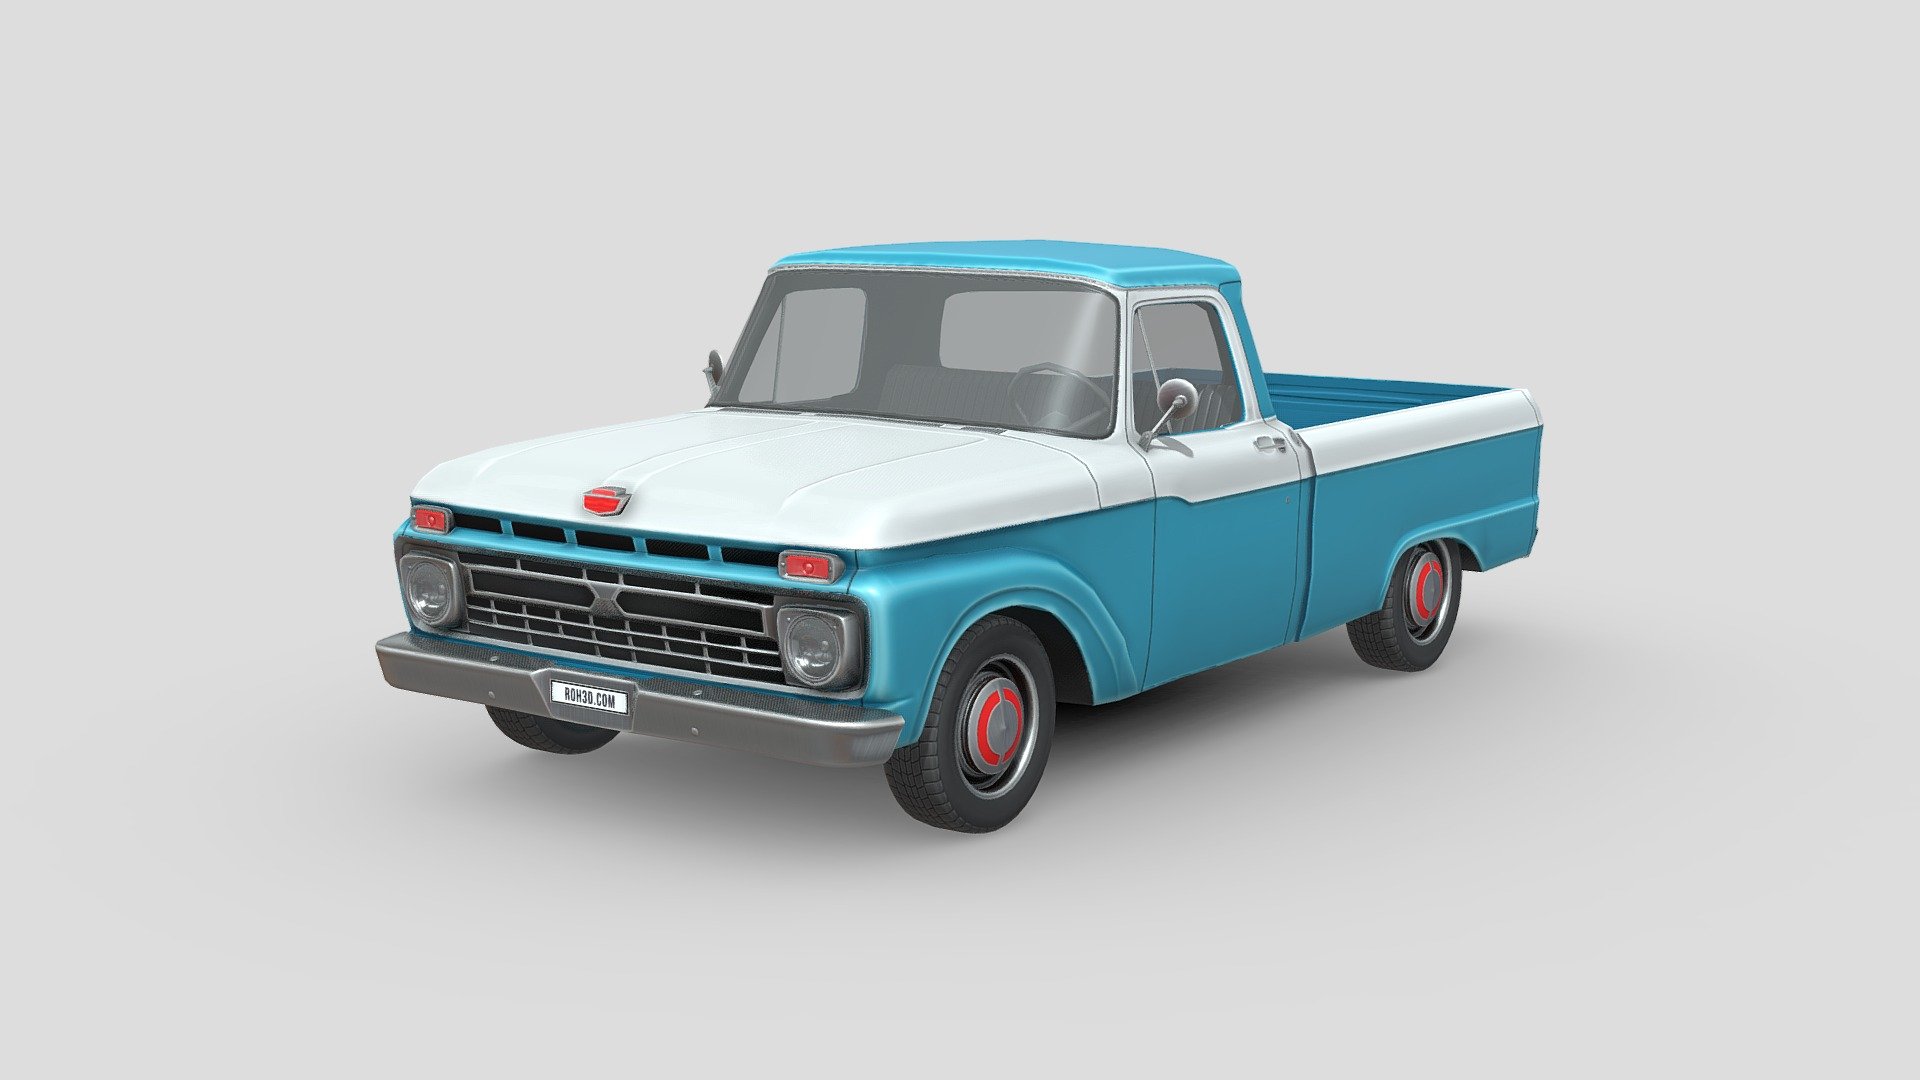 The fourth generation of the Ford F-Series is a line of pickup trucks and commercial trucks that were produced by Ford from the 1961 to 1966 model years. Lower and wider than the previous generation, the fourth-generation F-Series marked several design changes to the F-Series, distinguished by bed sides matching the hood line and window sill in height. The model line returned to two headlights, a change that remained in place for over 50 years.

Originally intended as the successor for the Styleside, Ford developed an all-new configuration, developing a body constructed in line with the car-based Ford Ranchero. Dubbed the &ldquo;integrated pickup